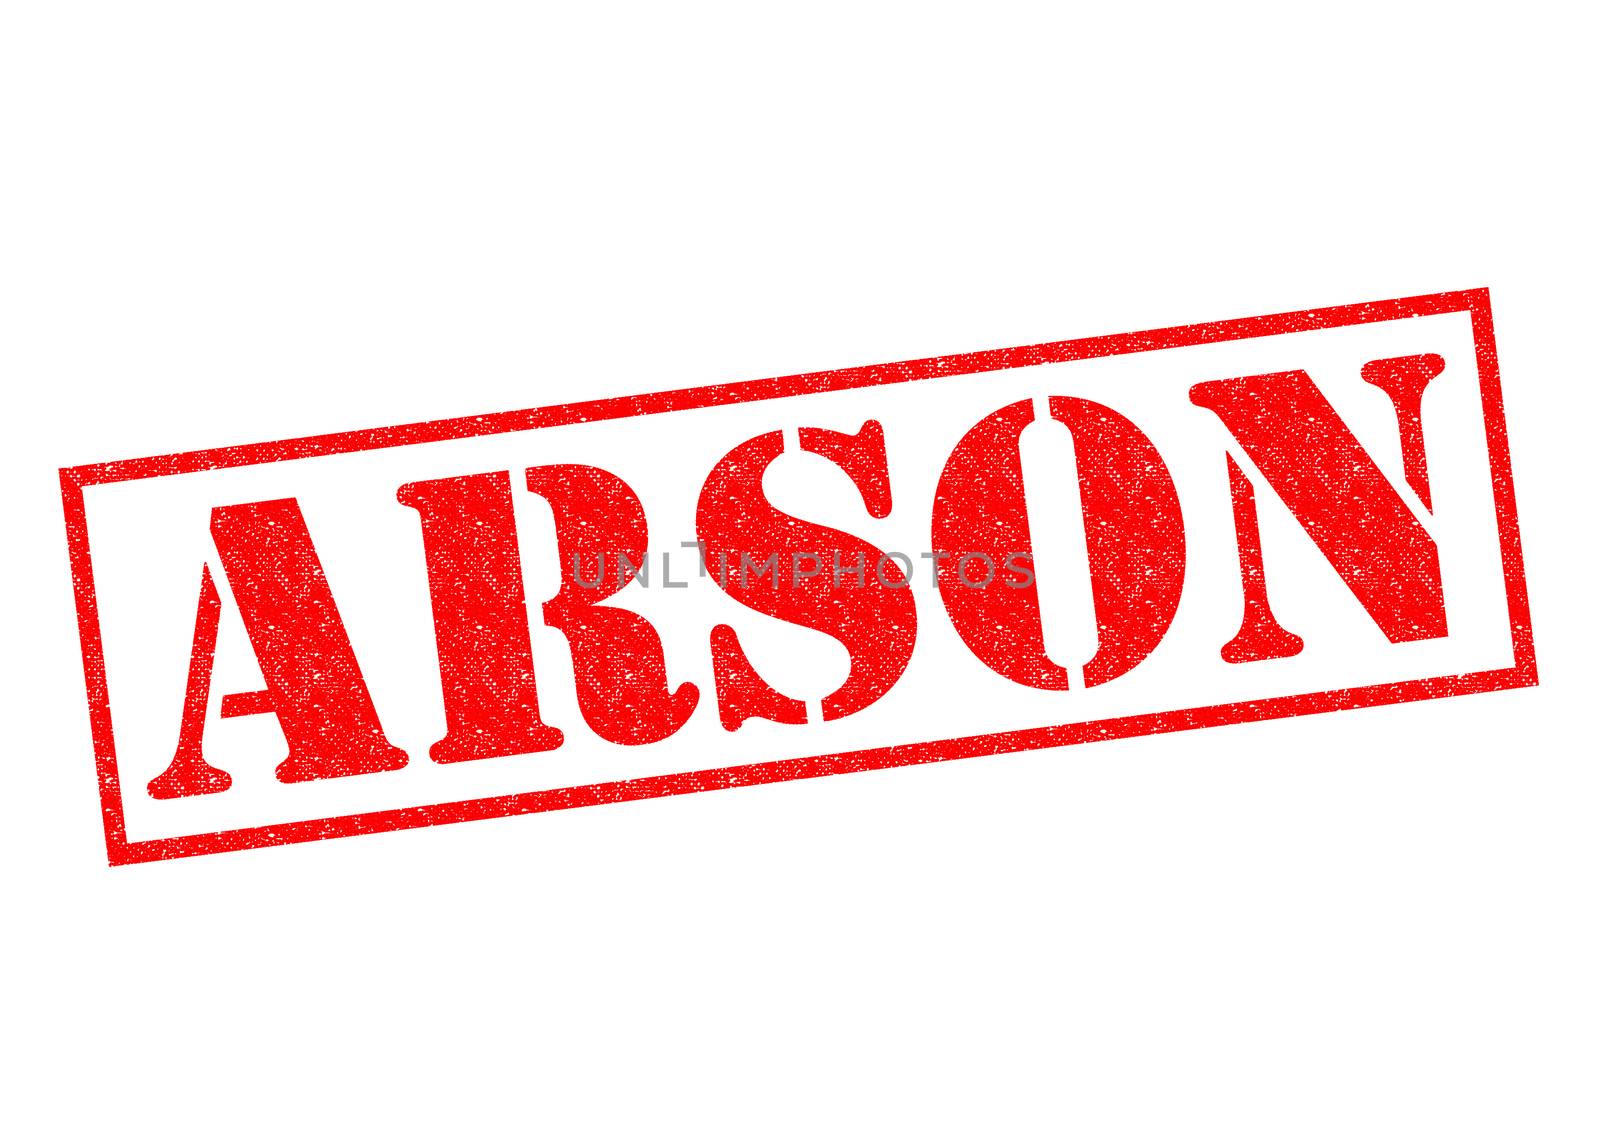 ARSON red Rubber Stamp over a white background.